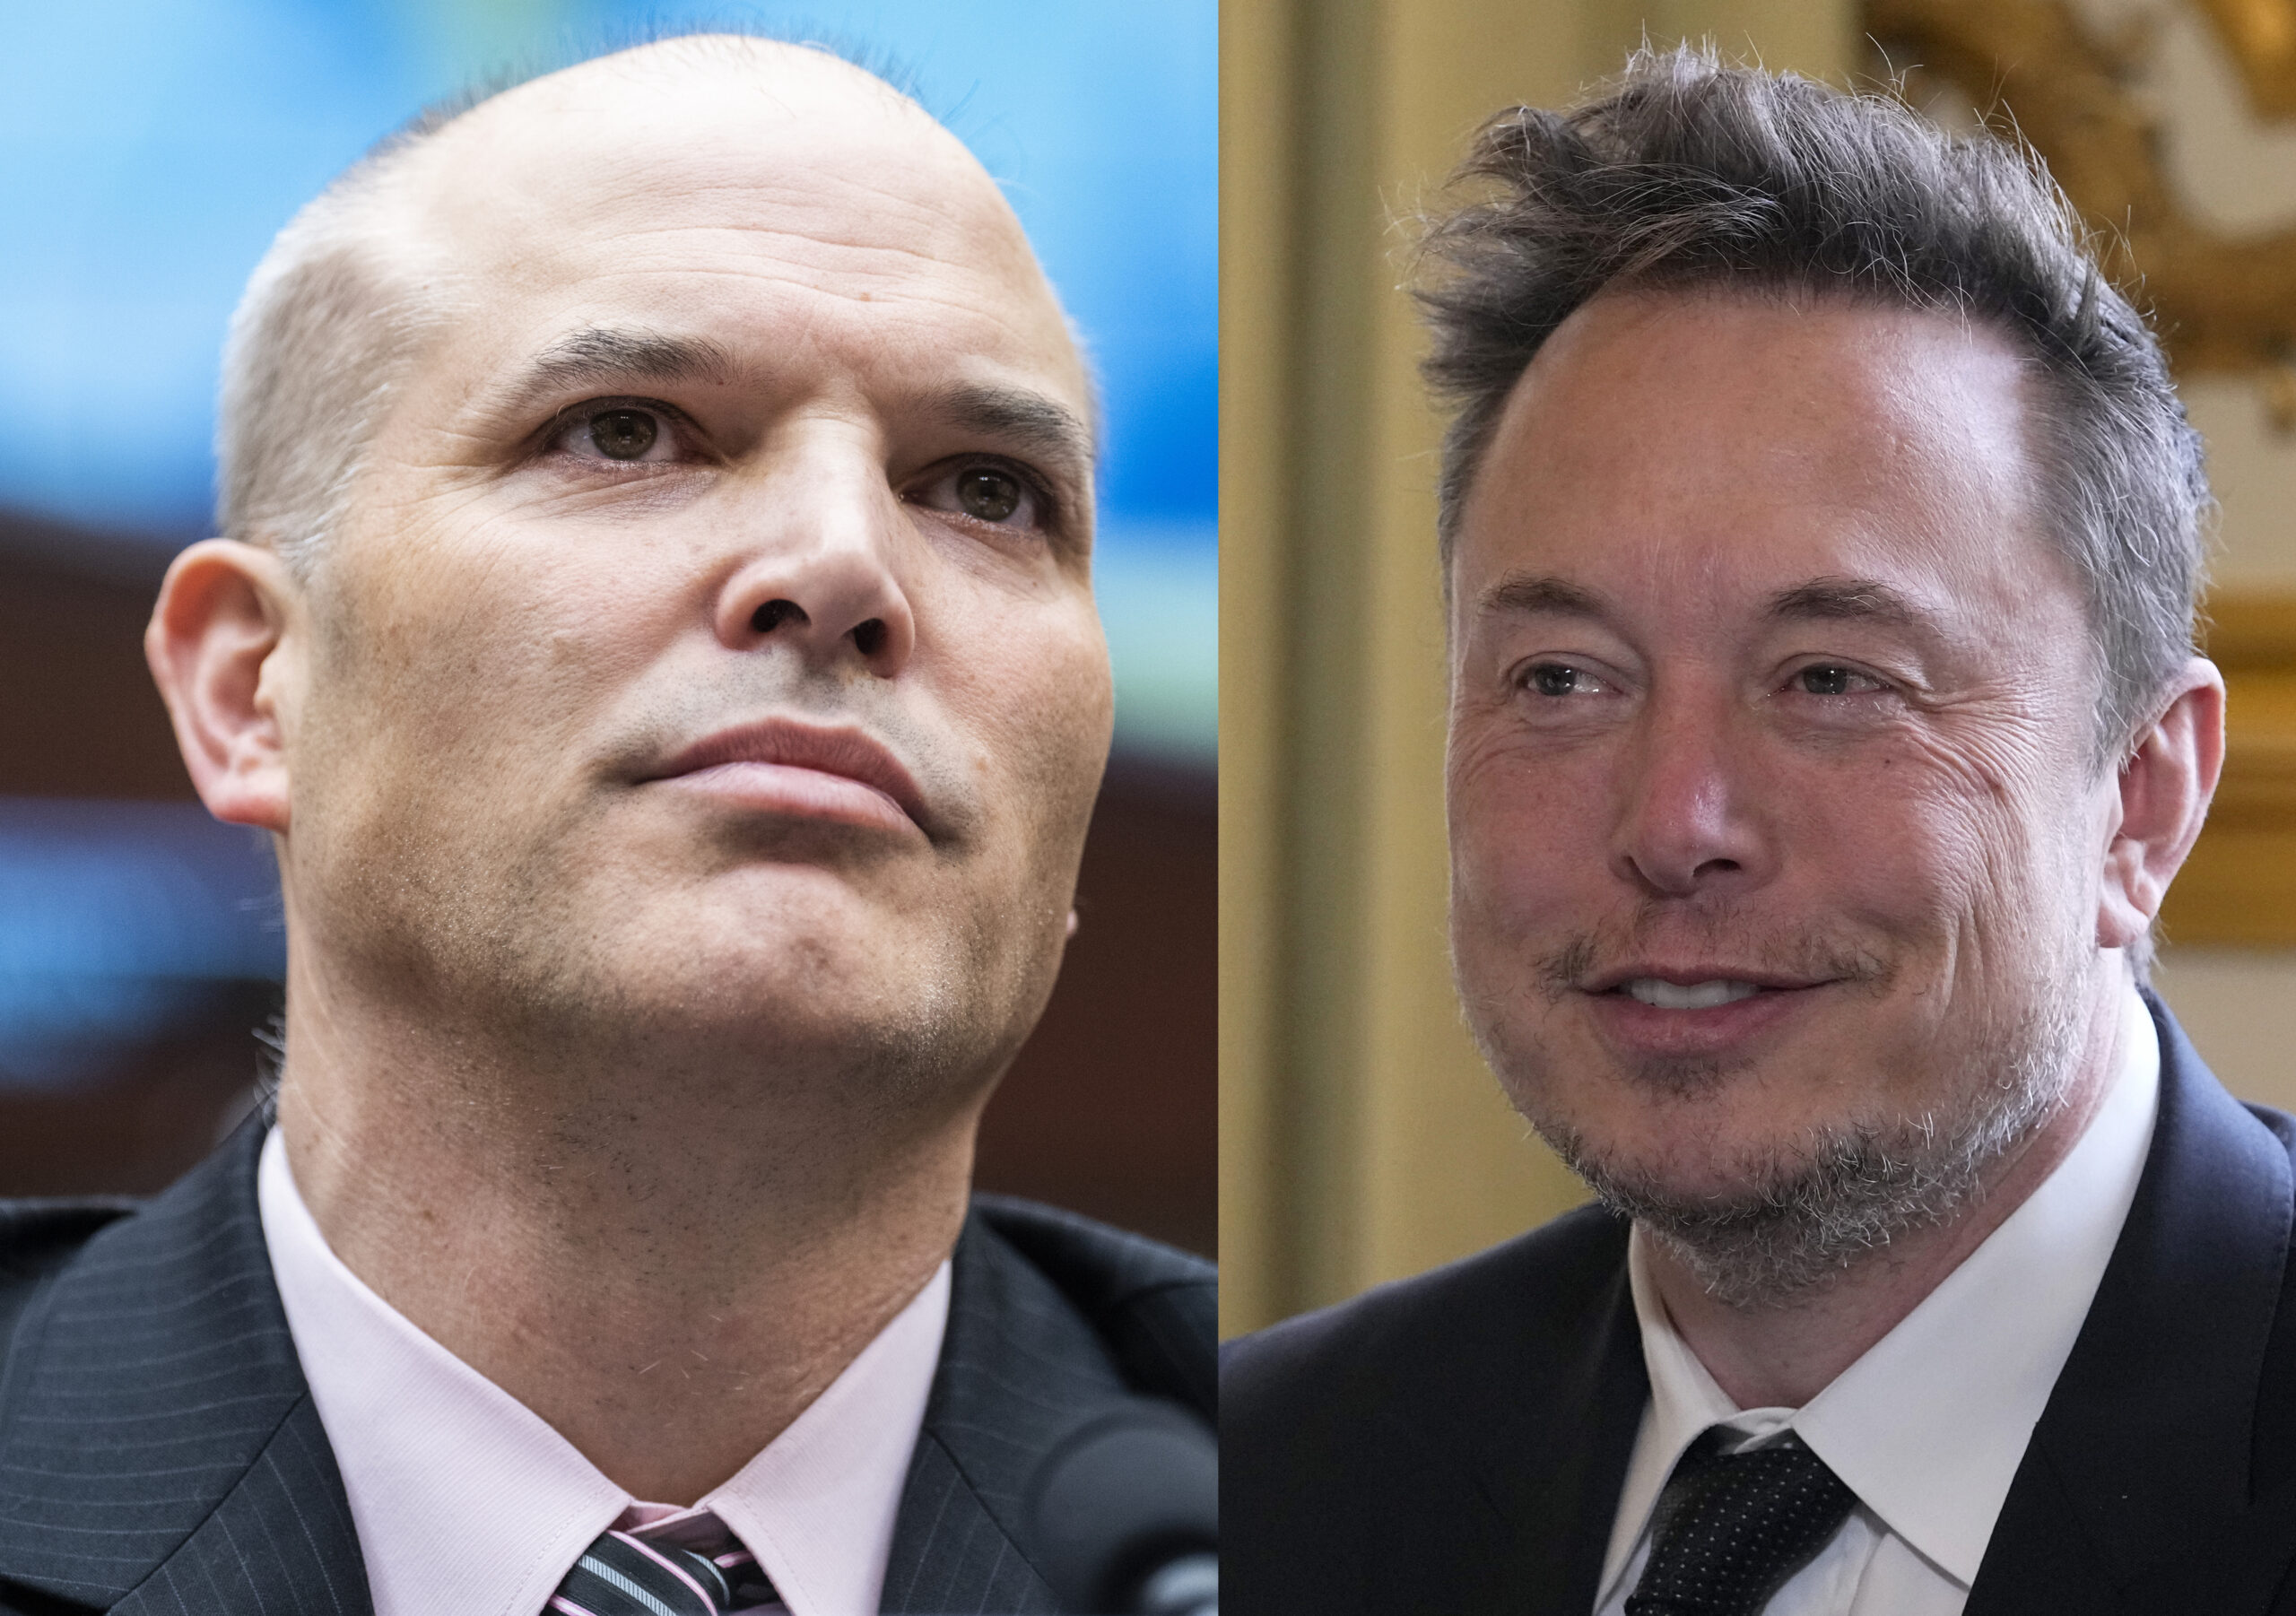 ‘You Are Dead To Me!’ – ‘Twitter Files’ Journalist Matt Taibbi Posts Unhinged Messages from Elon Musk (mediaite.com)